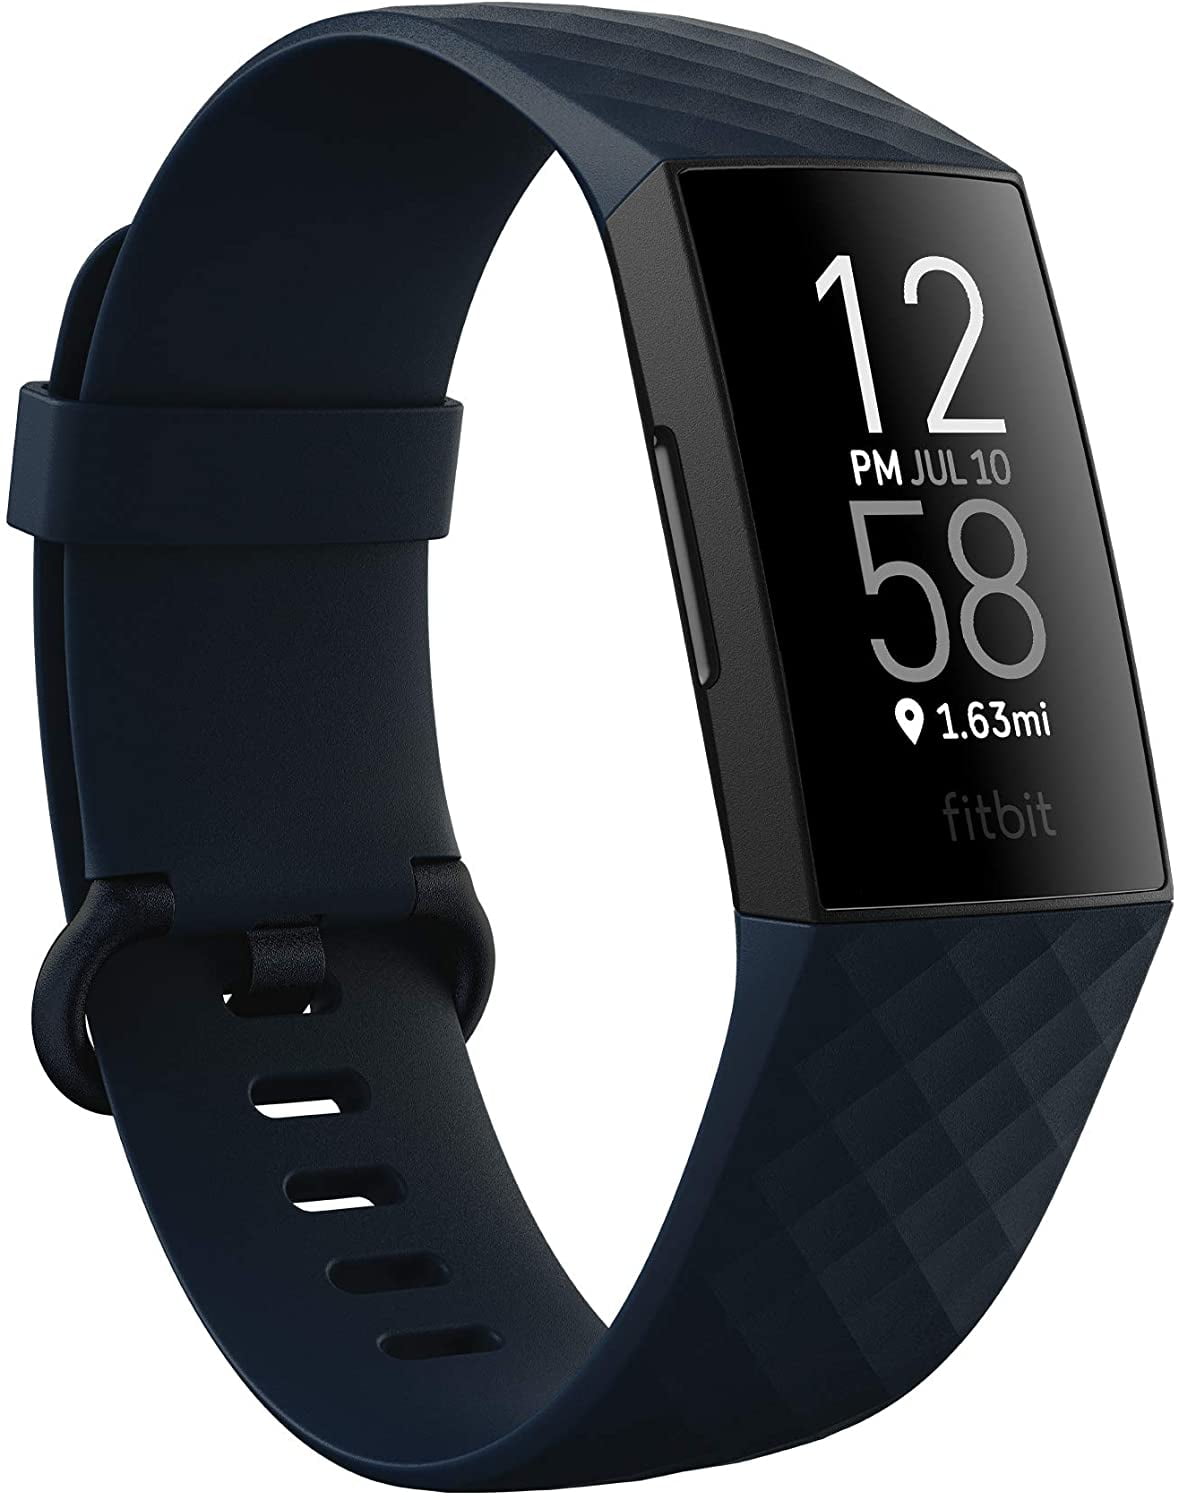 fitbit and heart rate monitor